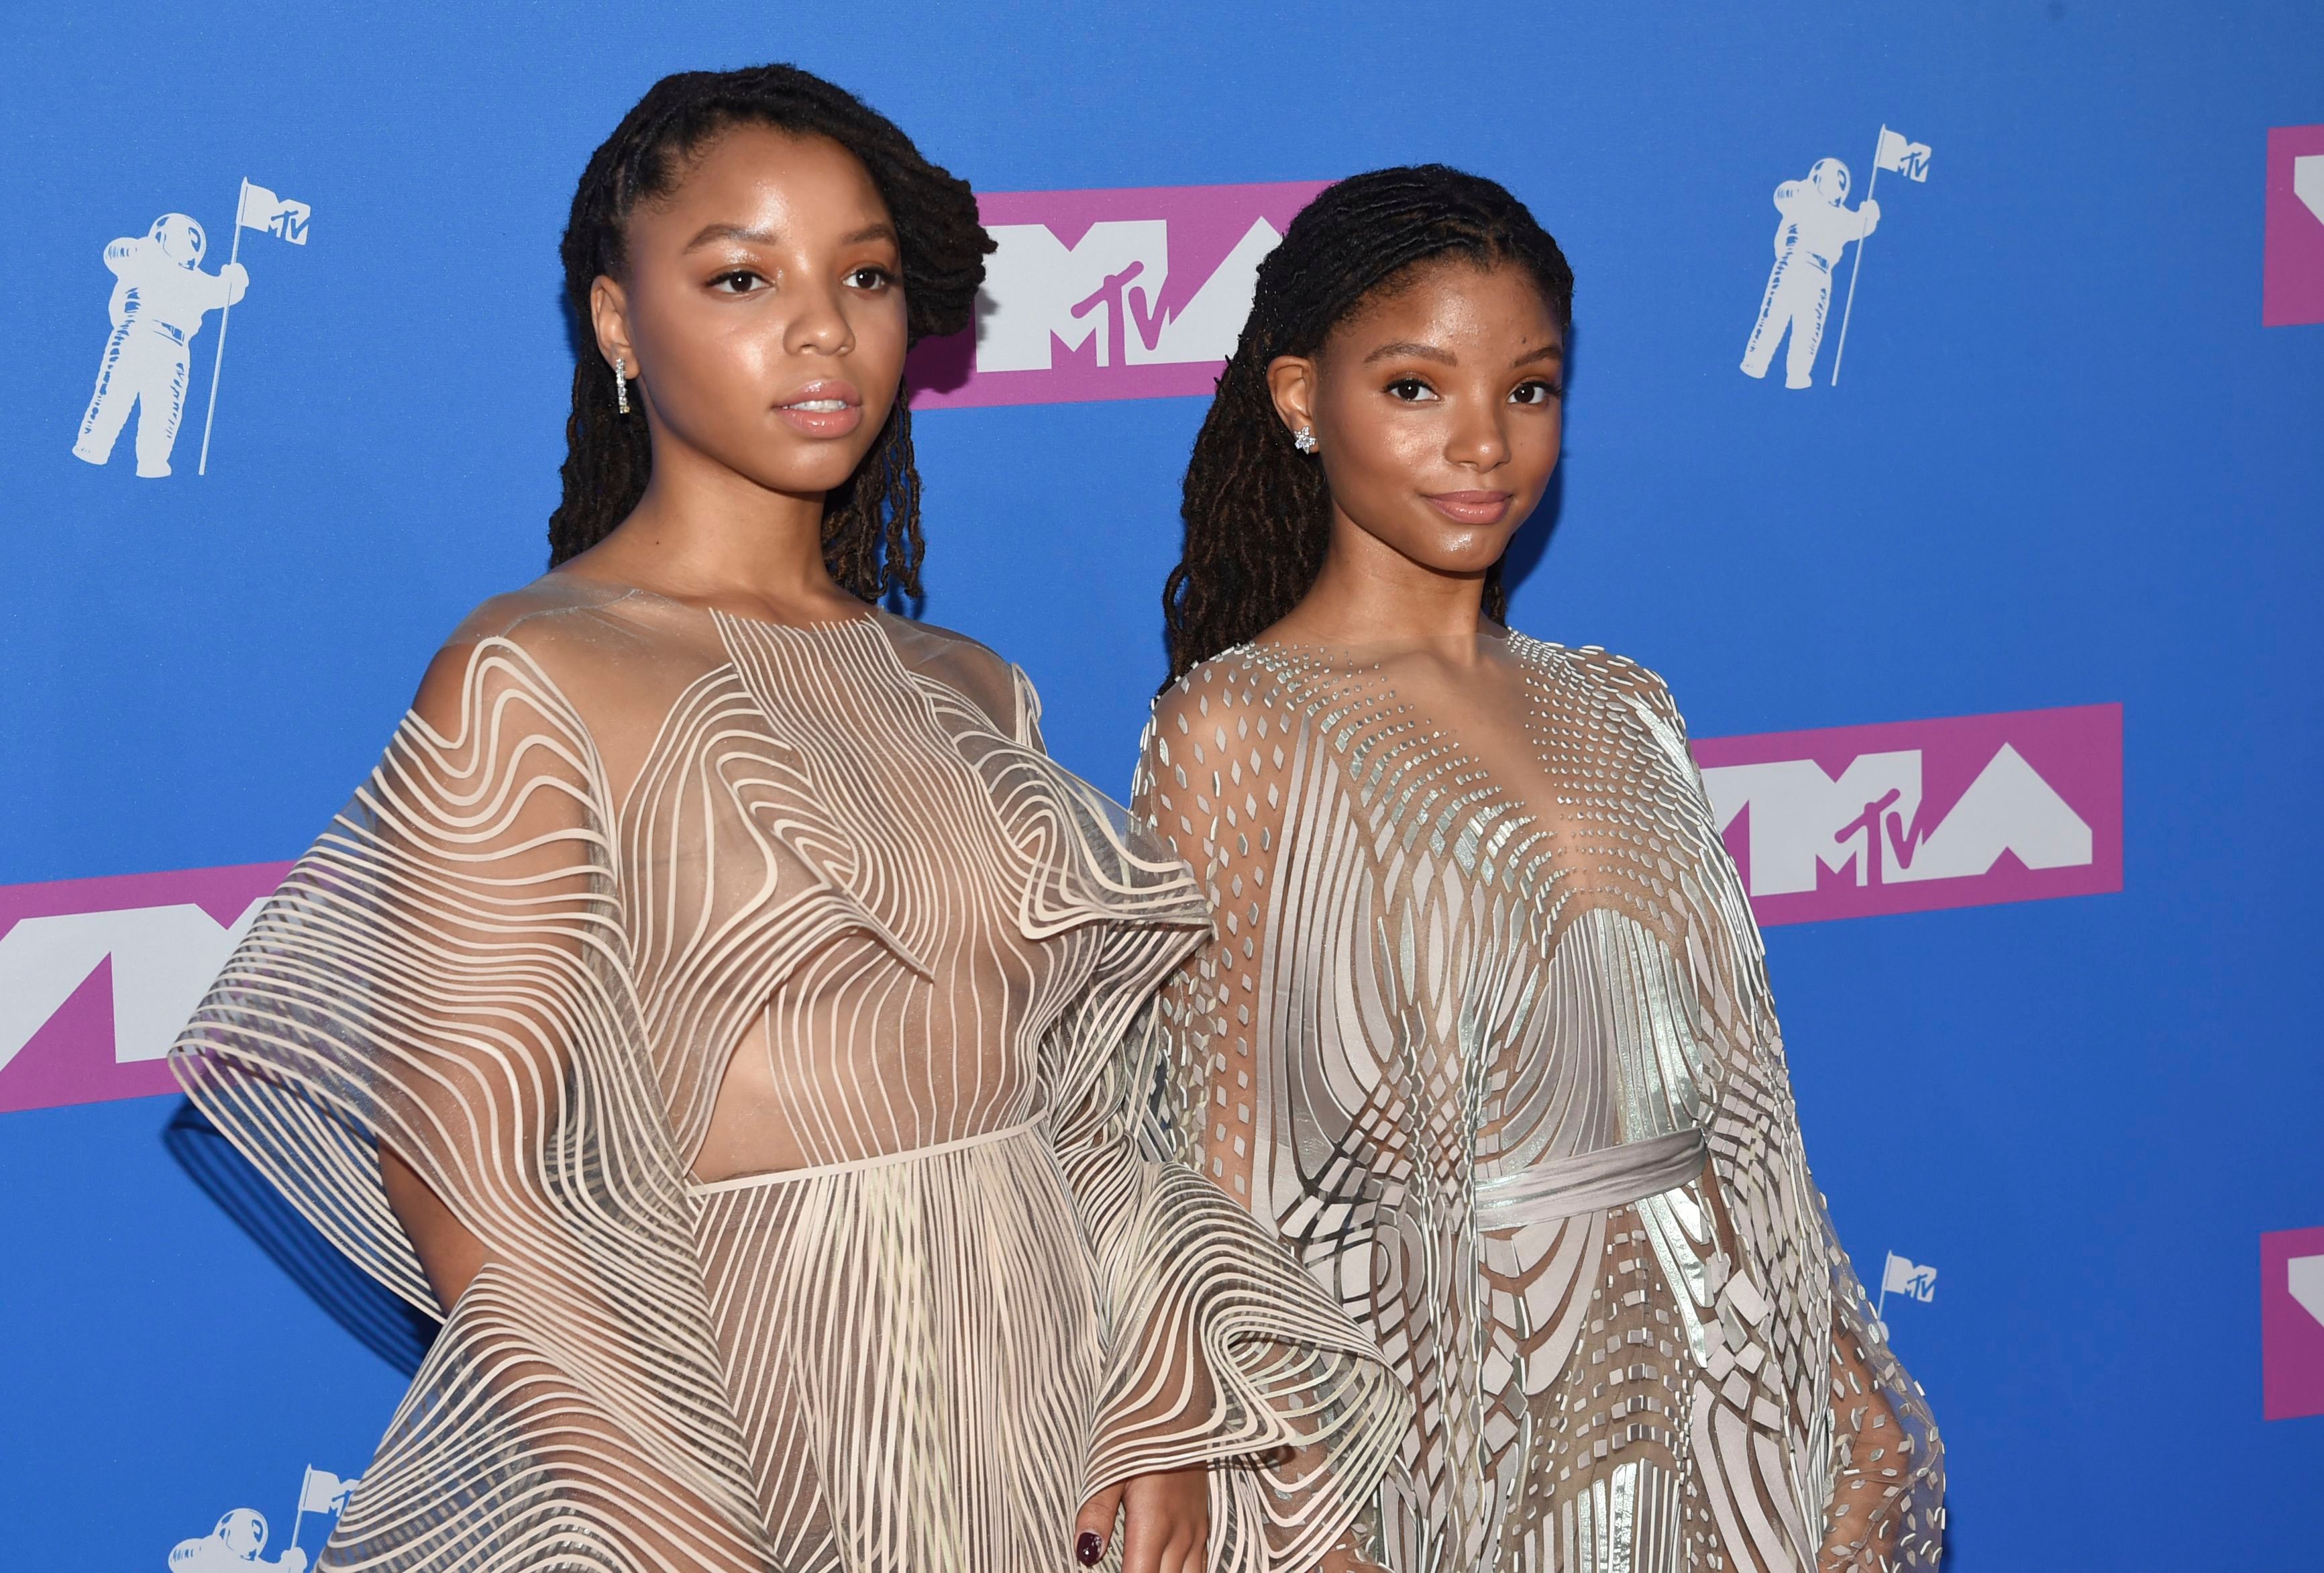 Beauty & The Beat! See How Our Favorite Celebrities Slayed Hair & Makeup At This Year’s VMAS